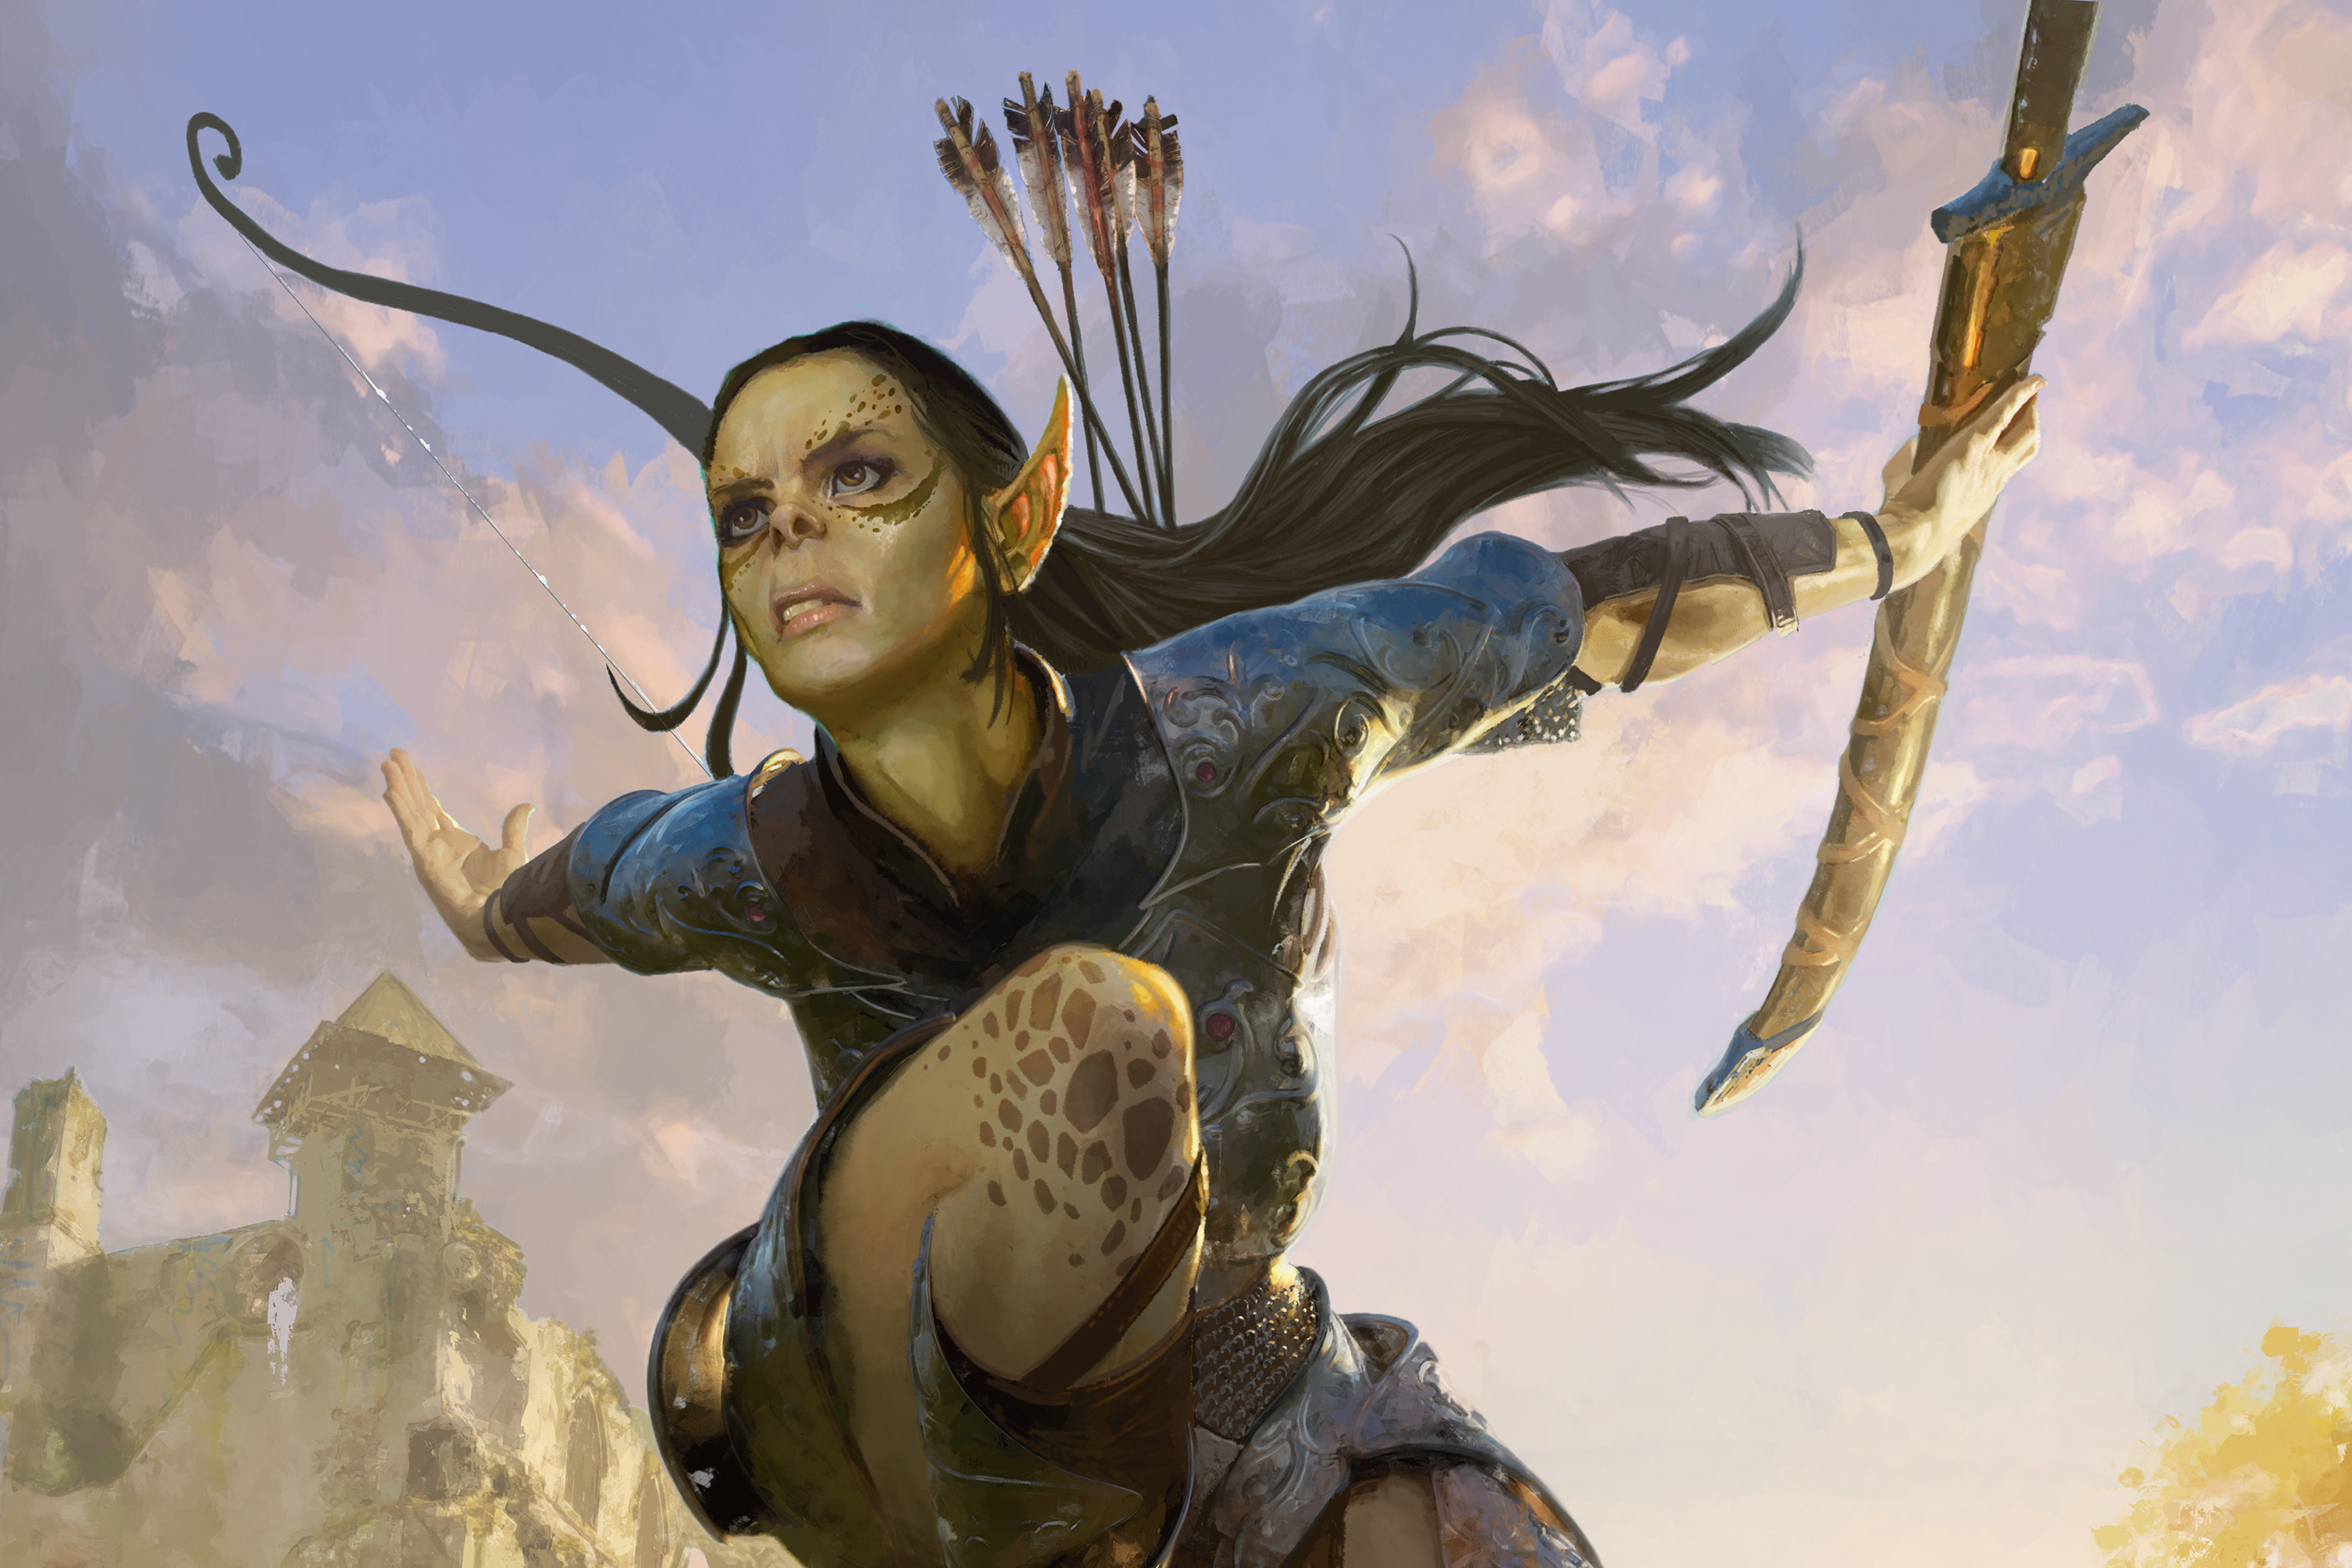 Magic: The Gathering's new D&D cards bring more dungeon crawling